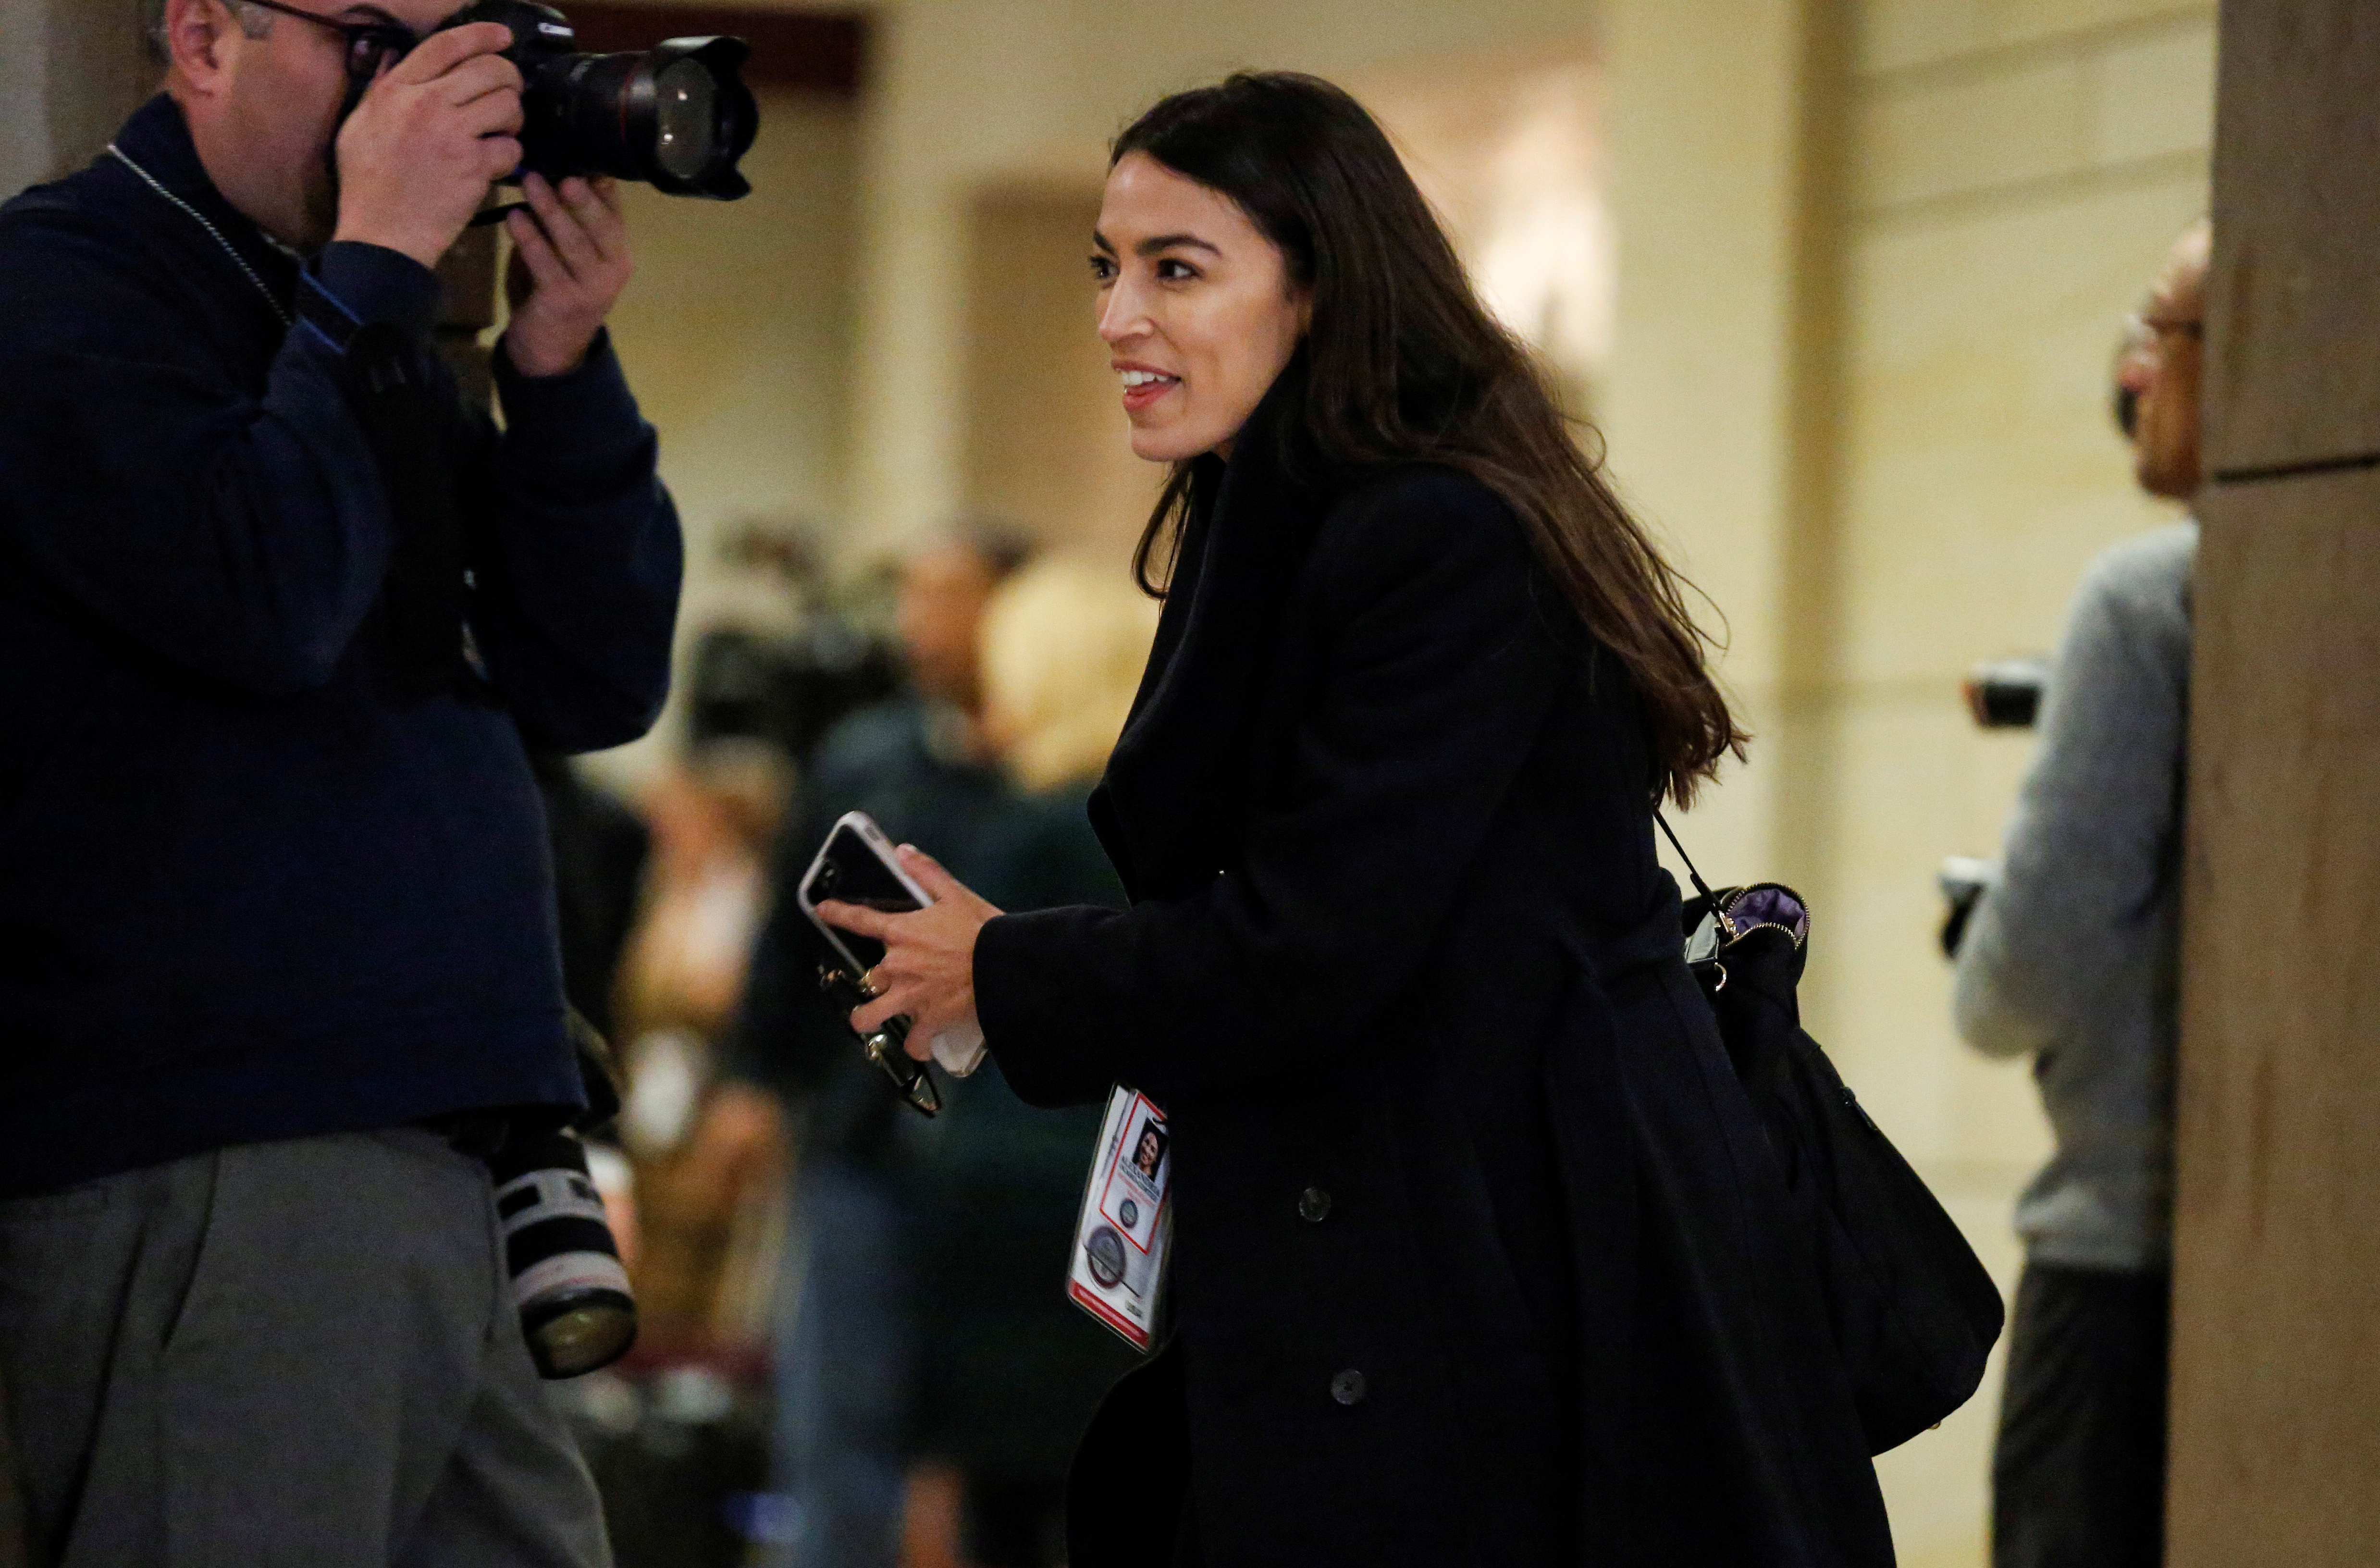 Representative-elect Alexandria Ocasio-Cortez (D-NY) arrives for a House Democratic Caucus meeting to choose leaders for the 116th Congress on Capitol Hill in Washington